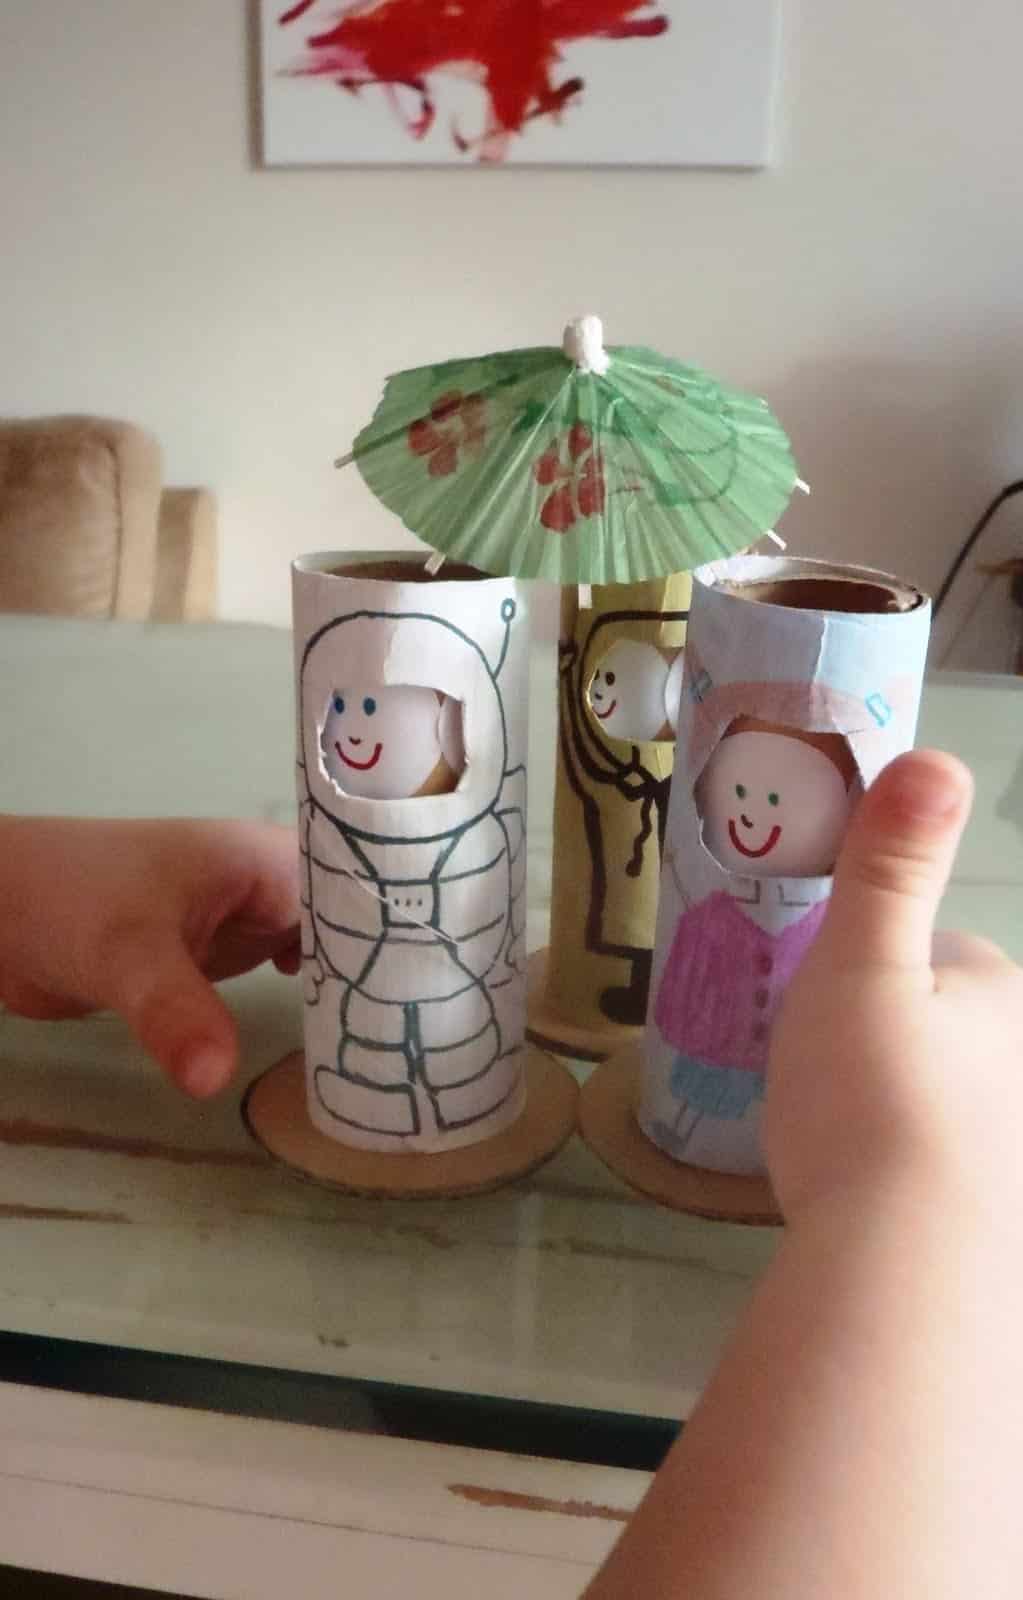 TOILET PAPER ROLL DOLL THAT MAKES FACES